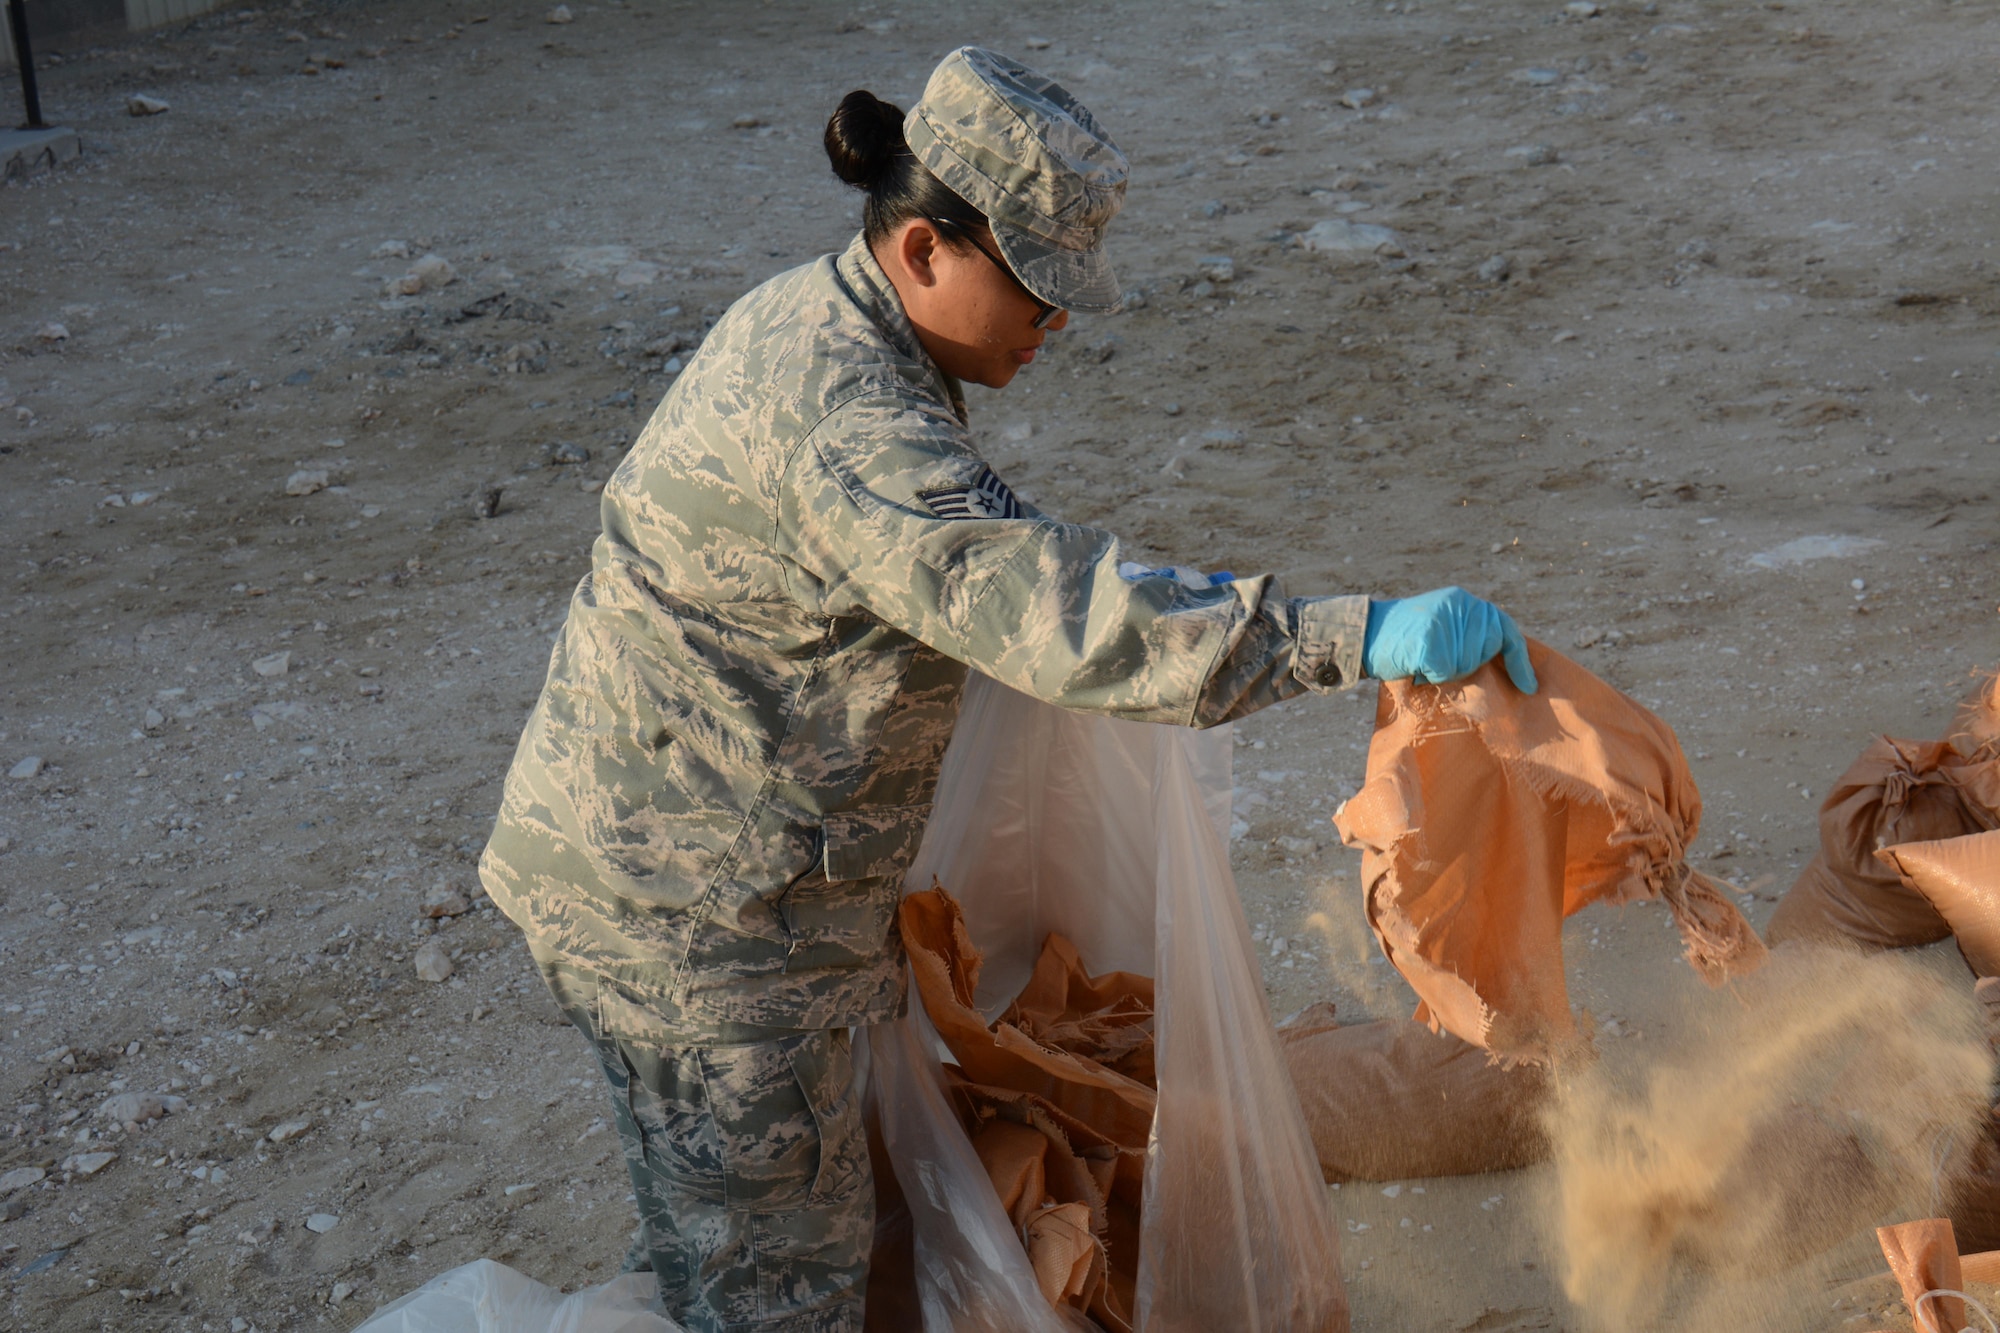 Tech. Sgt. Jocelyn Ferber, U.S. Air Force’s Central Command's Protocol non-commissioned officer in charge, shakes out sand from a broken sandbag during an Operation Community clean-up event at Al Udeid Air Base, Qatar Dec. 1. Ferber, a native of Joint Base Lewis-McChord, Washington, said she enjoyed helping clean up the base. More than 70 volunteers took part in the event collecting 130 bags of trash in one hour. (U.S. Air Force photo by Tech. Sgt. James Hodgman/Released)